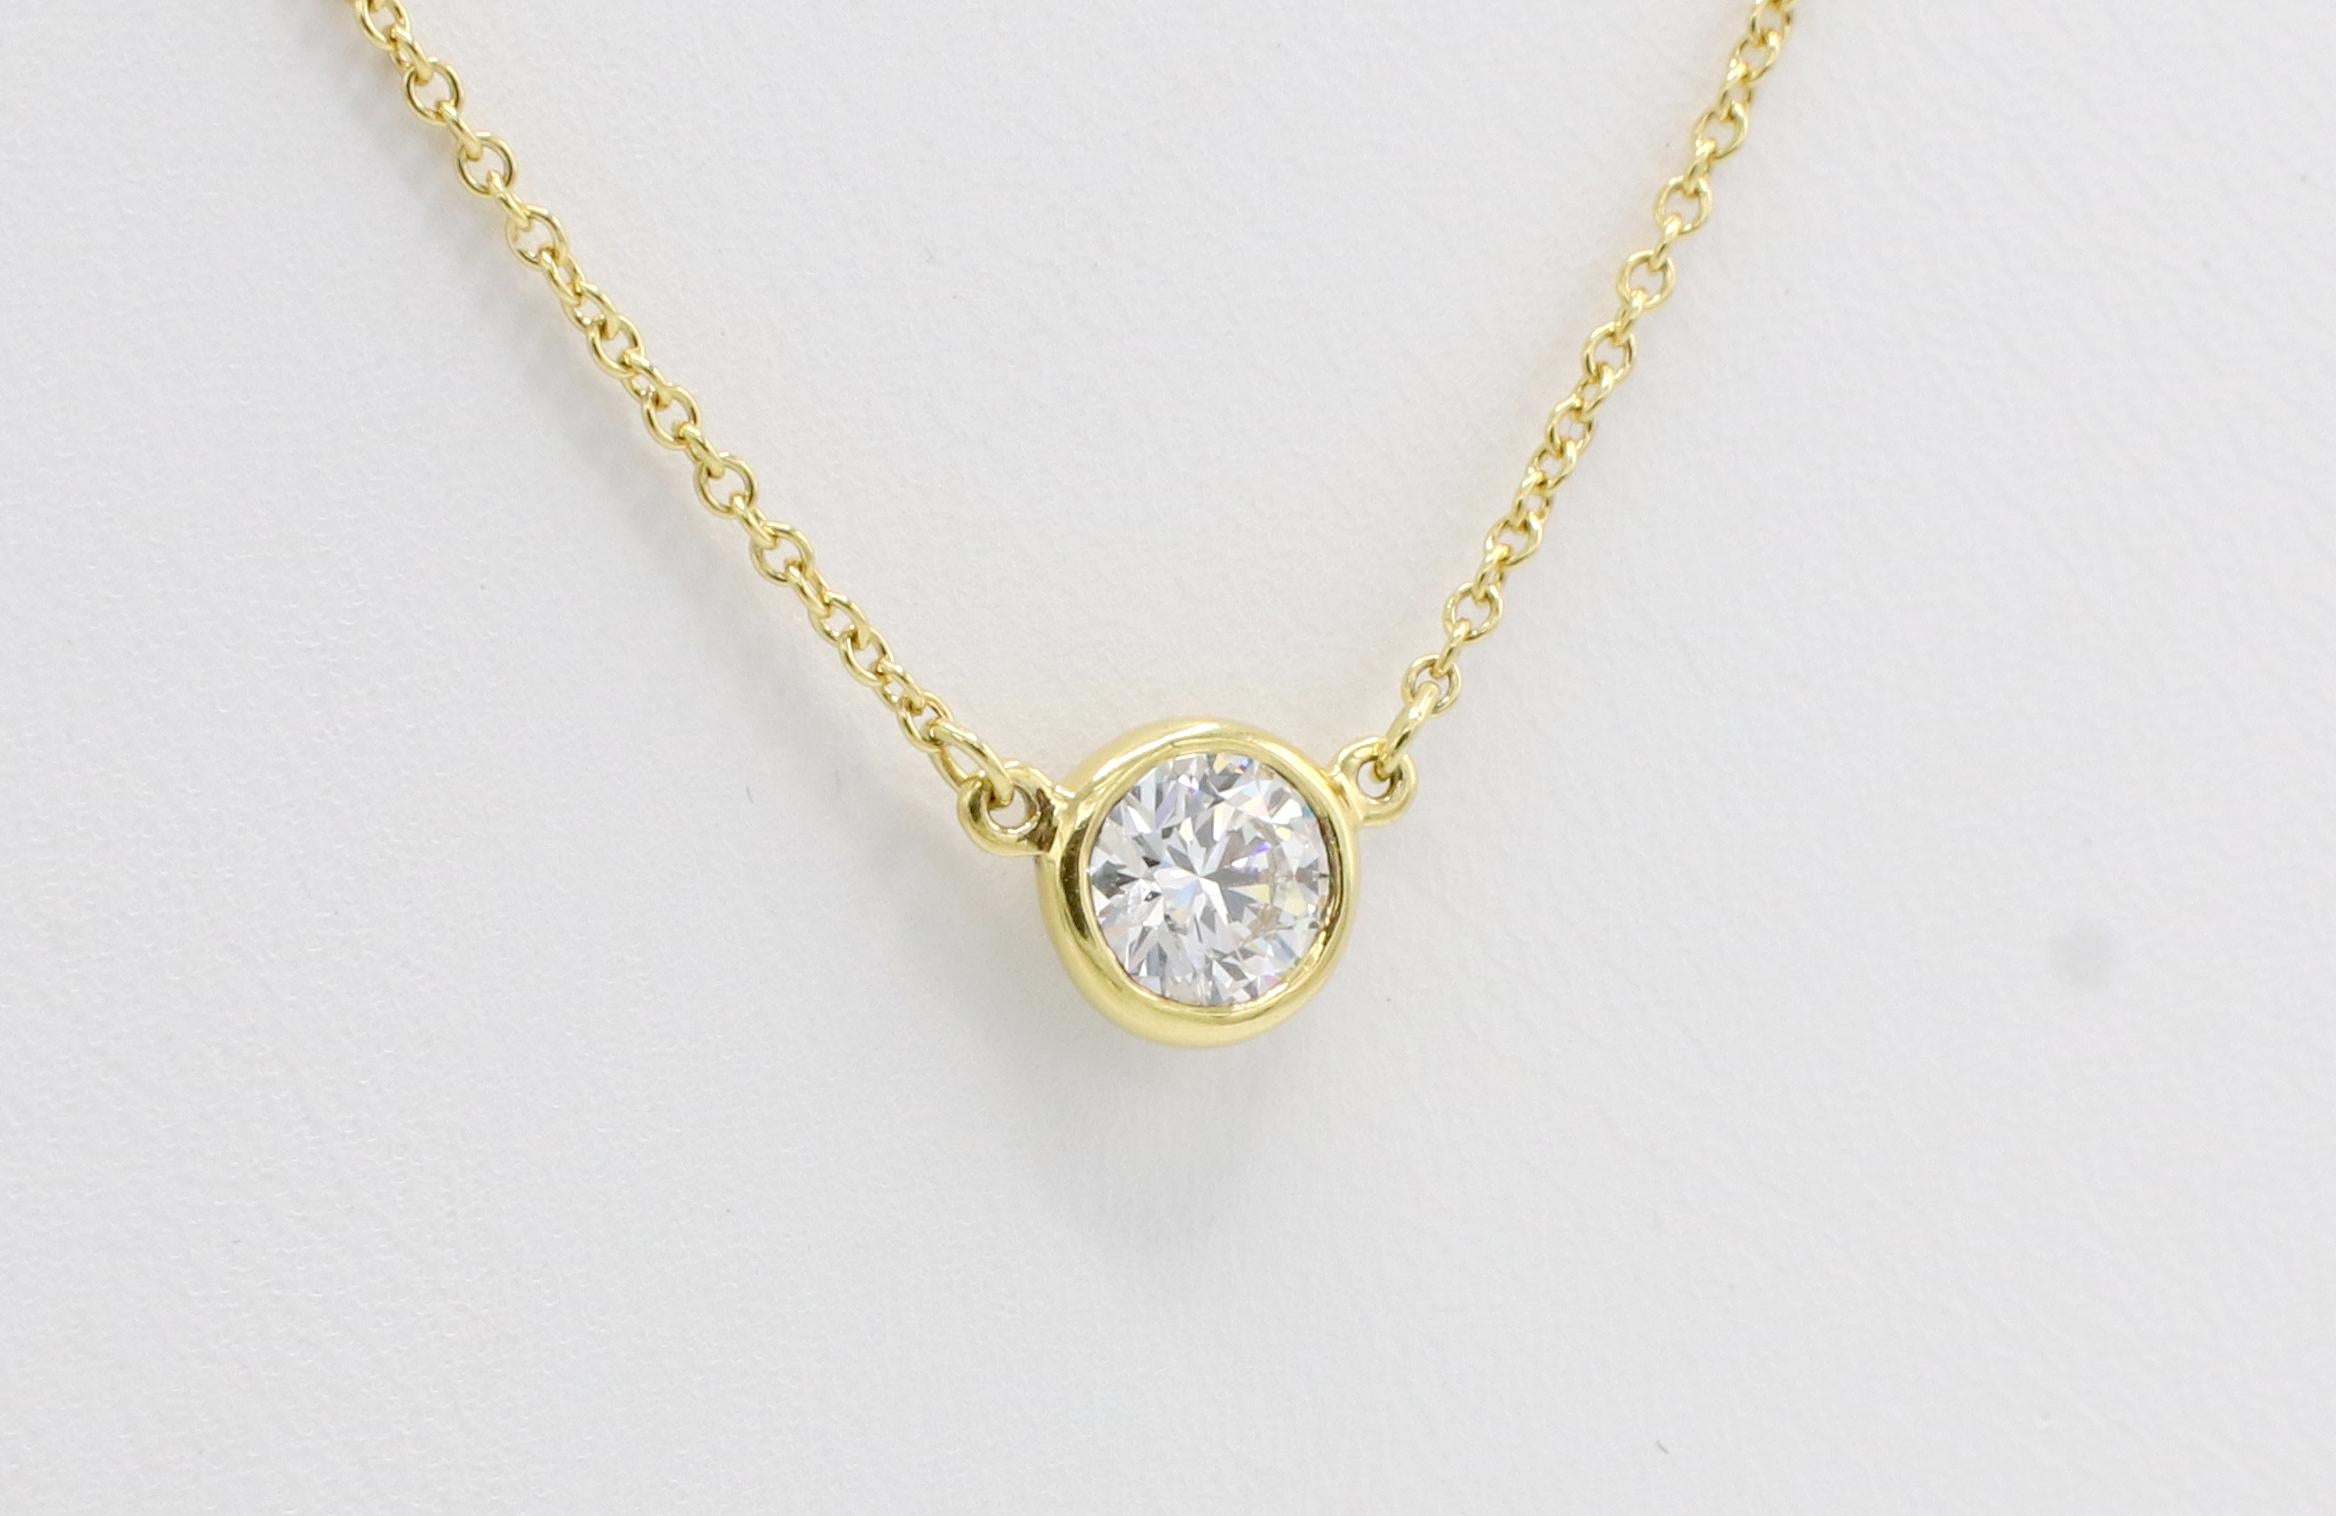 Tiffany & Co. Elsa Peretti Single Diamond By The Yard Pendant Yellow Gold Necklace
Metal: 18k yellow gold
Weight: 1.86 grams
Diamond: Approx. .54 CT G VS
Chain: 17 inches
